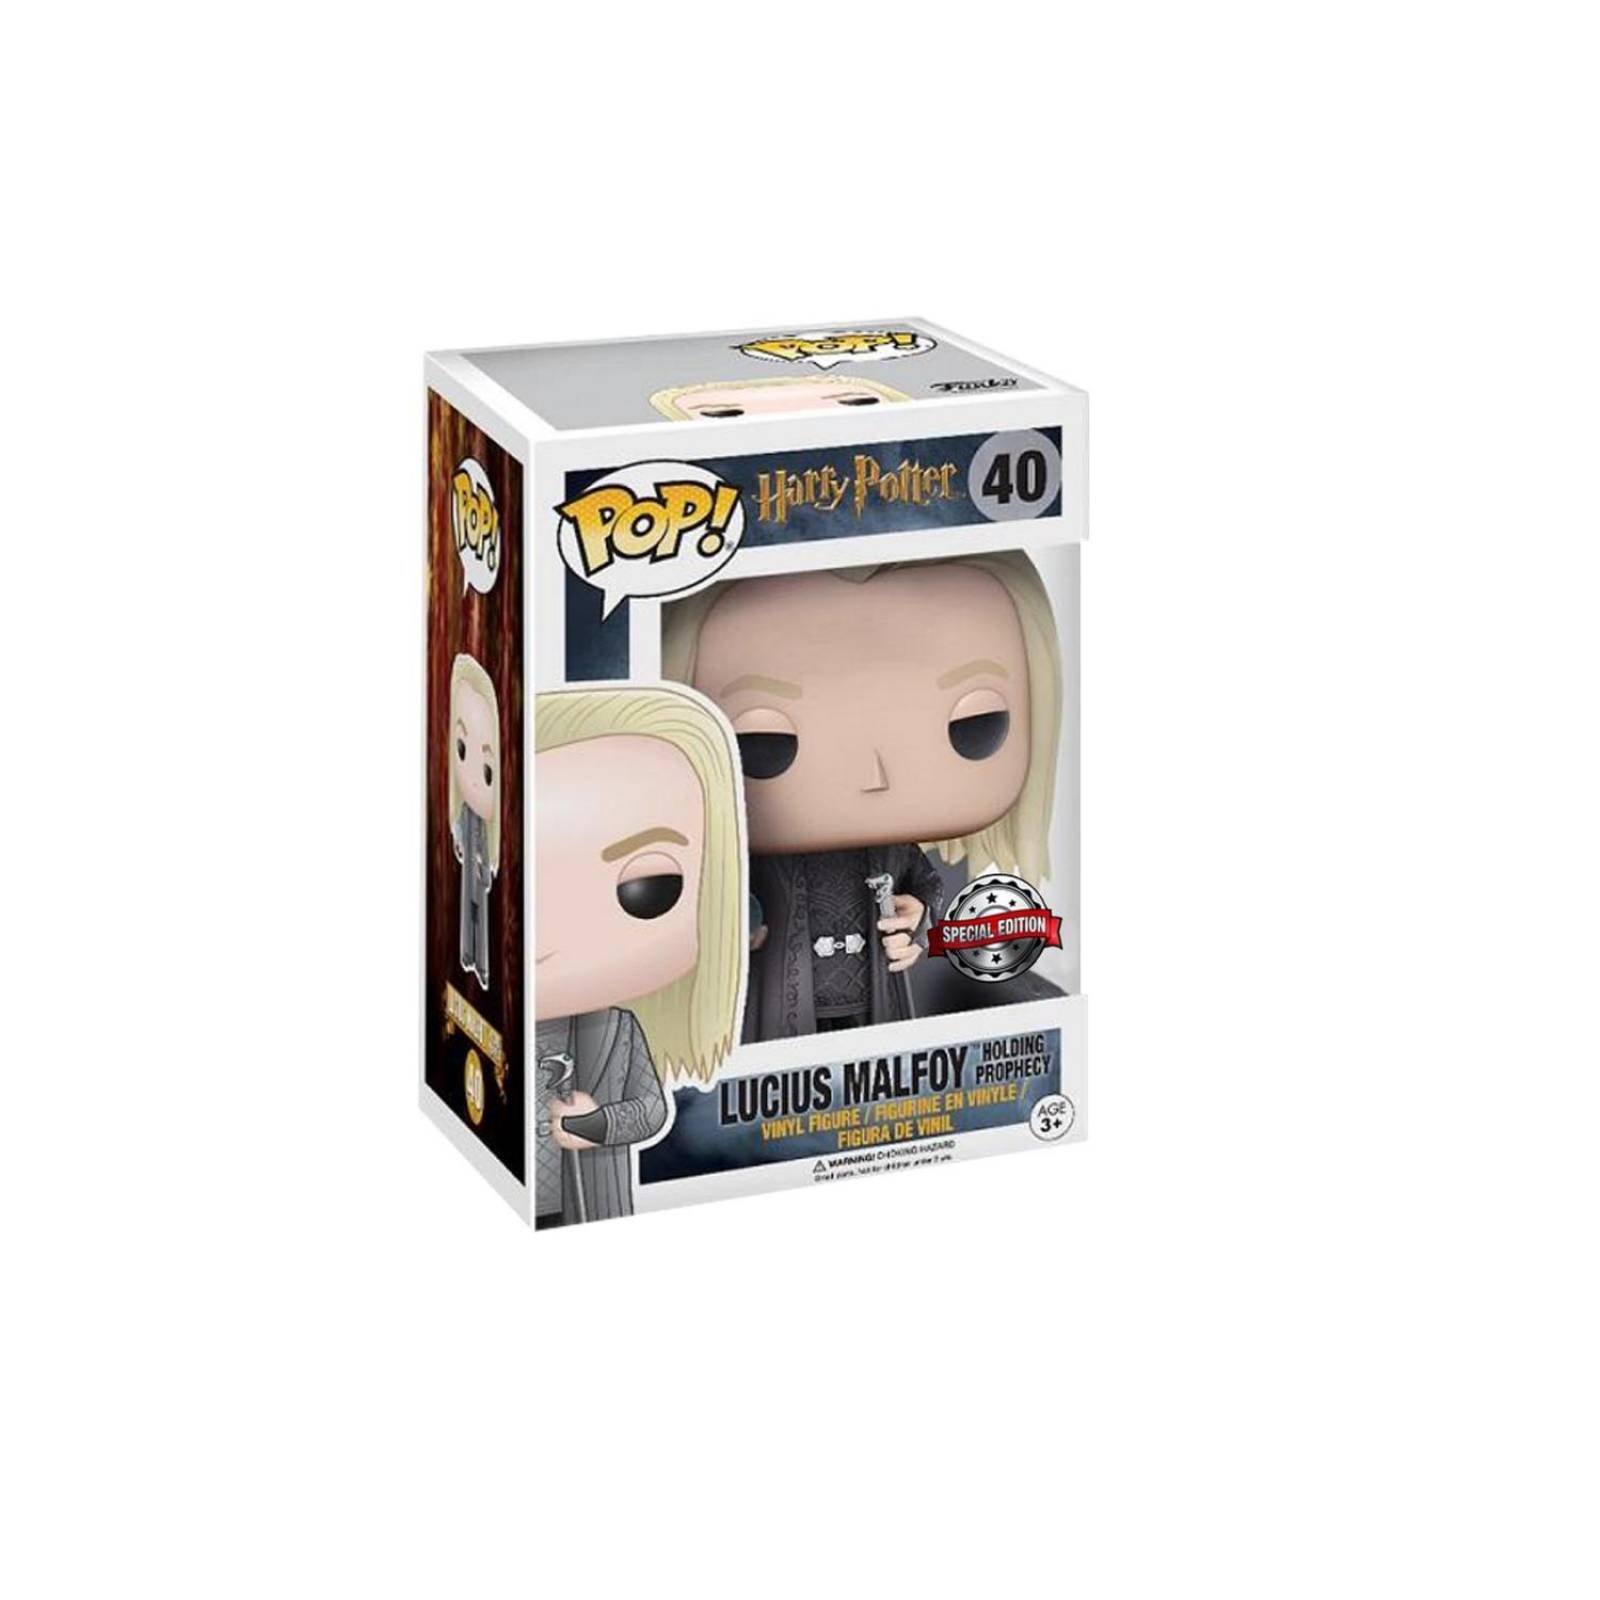 Lucius w Prophecy Funko Pop Harry Potter Exclusivo Special Edition 